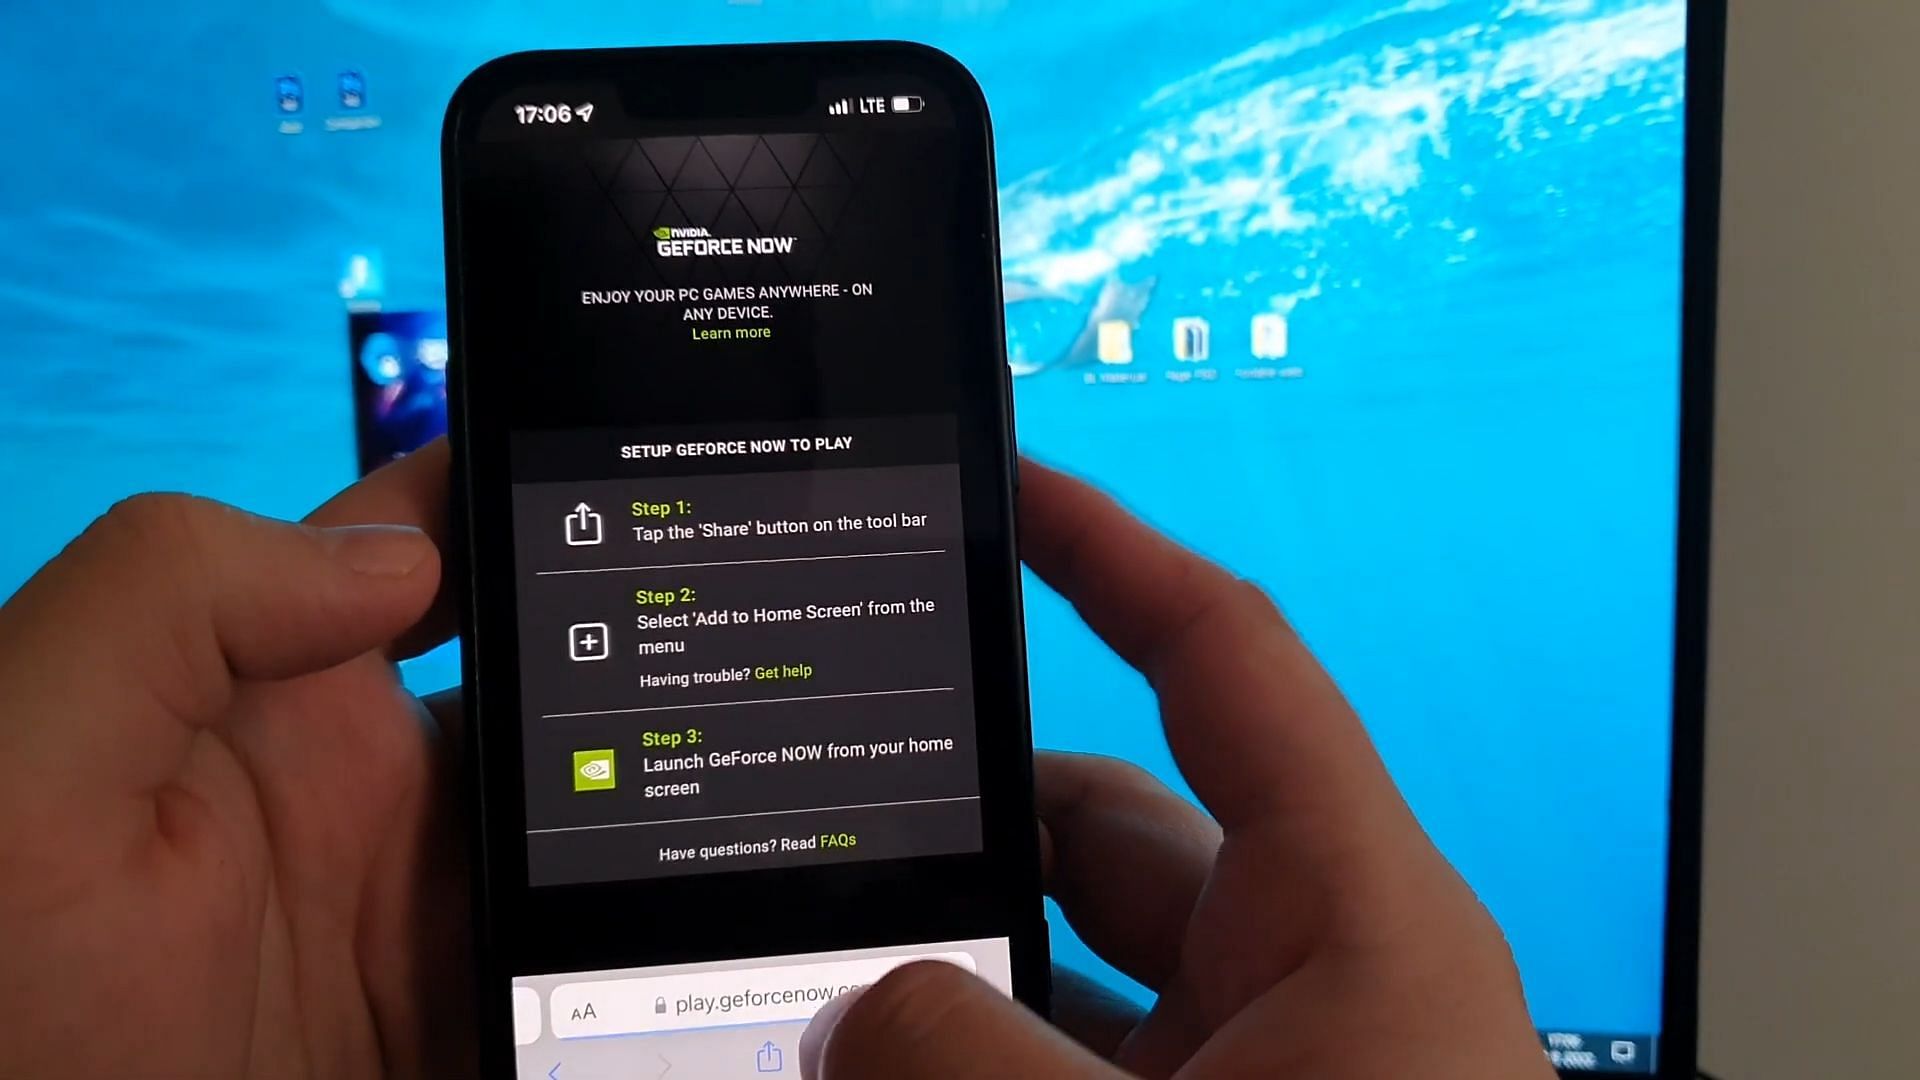 You will have to add GeForce Now to the Home Screen before playing the game (Image via AsPe Gaming / YouTube screenshot)